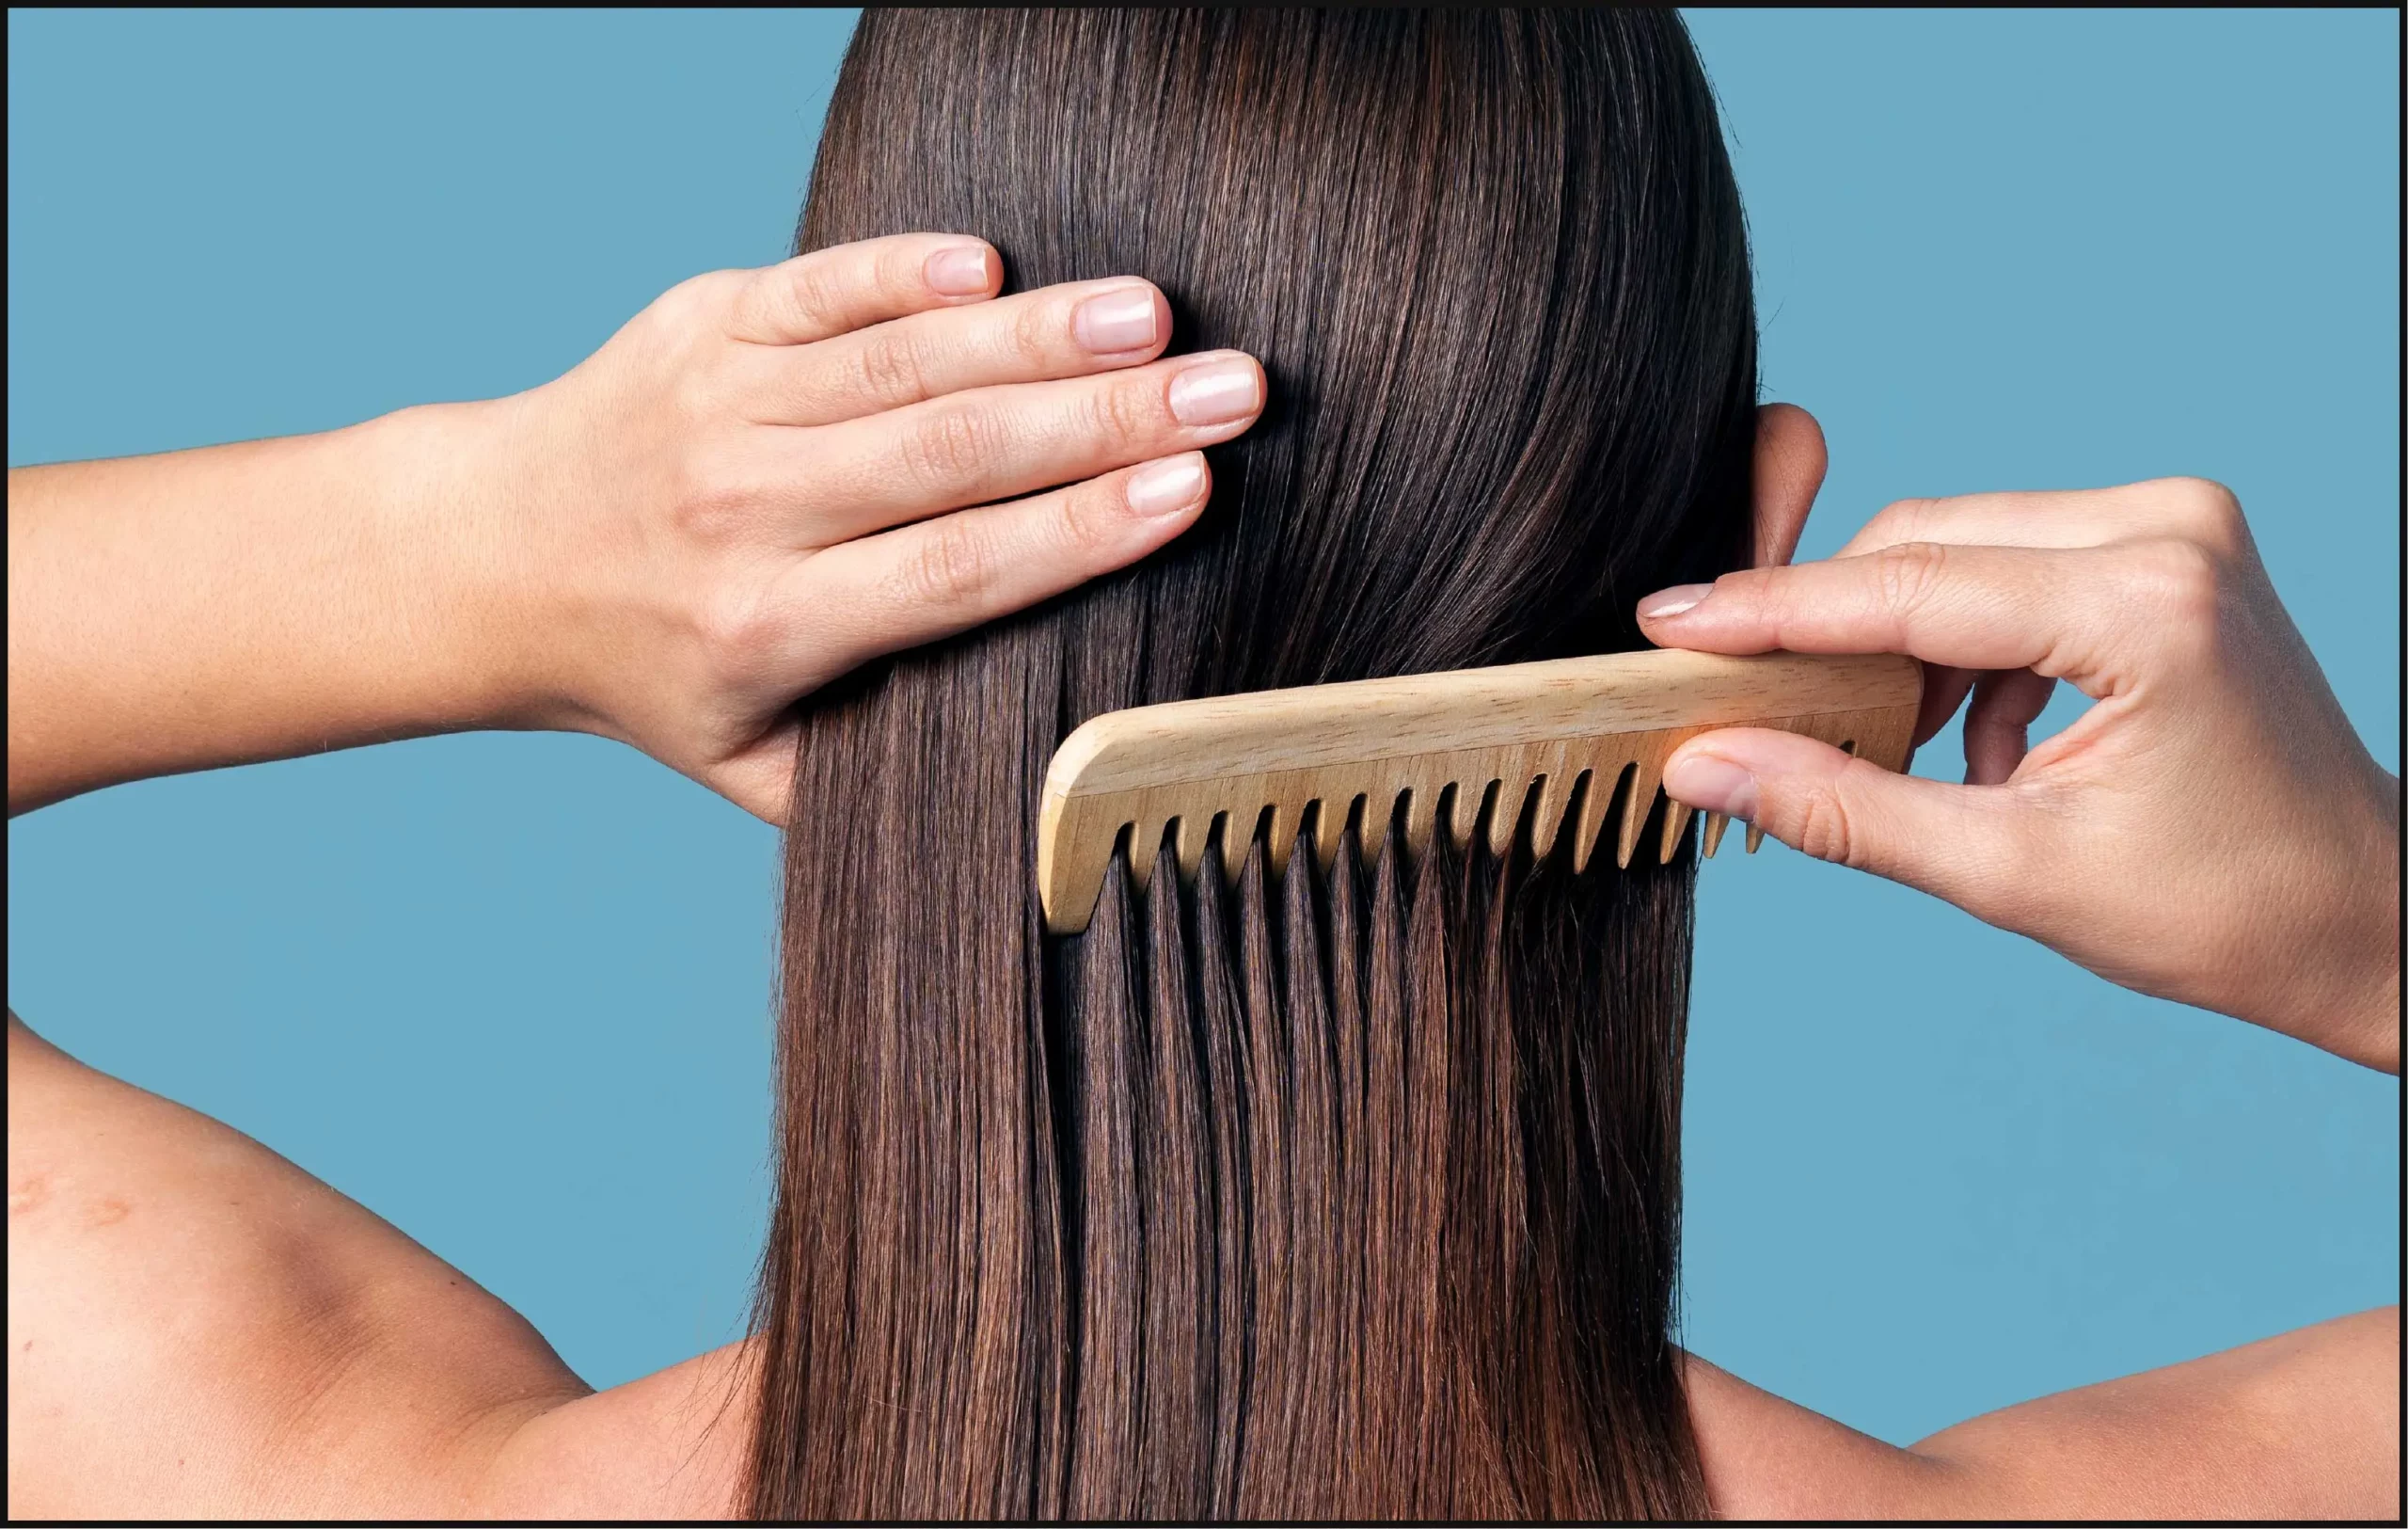 Woman gently combing hair with a wide tooth comb.